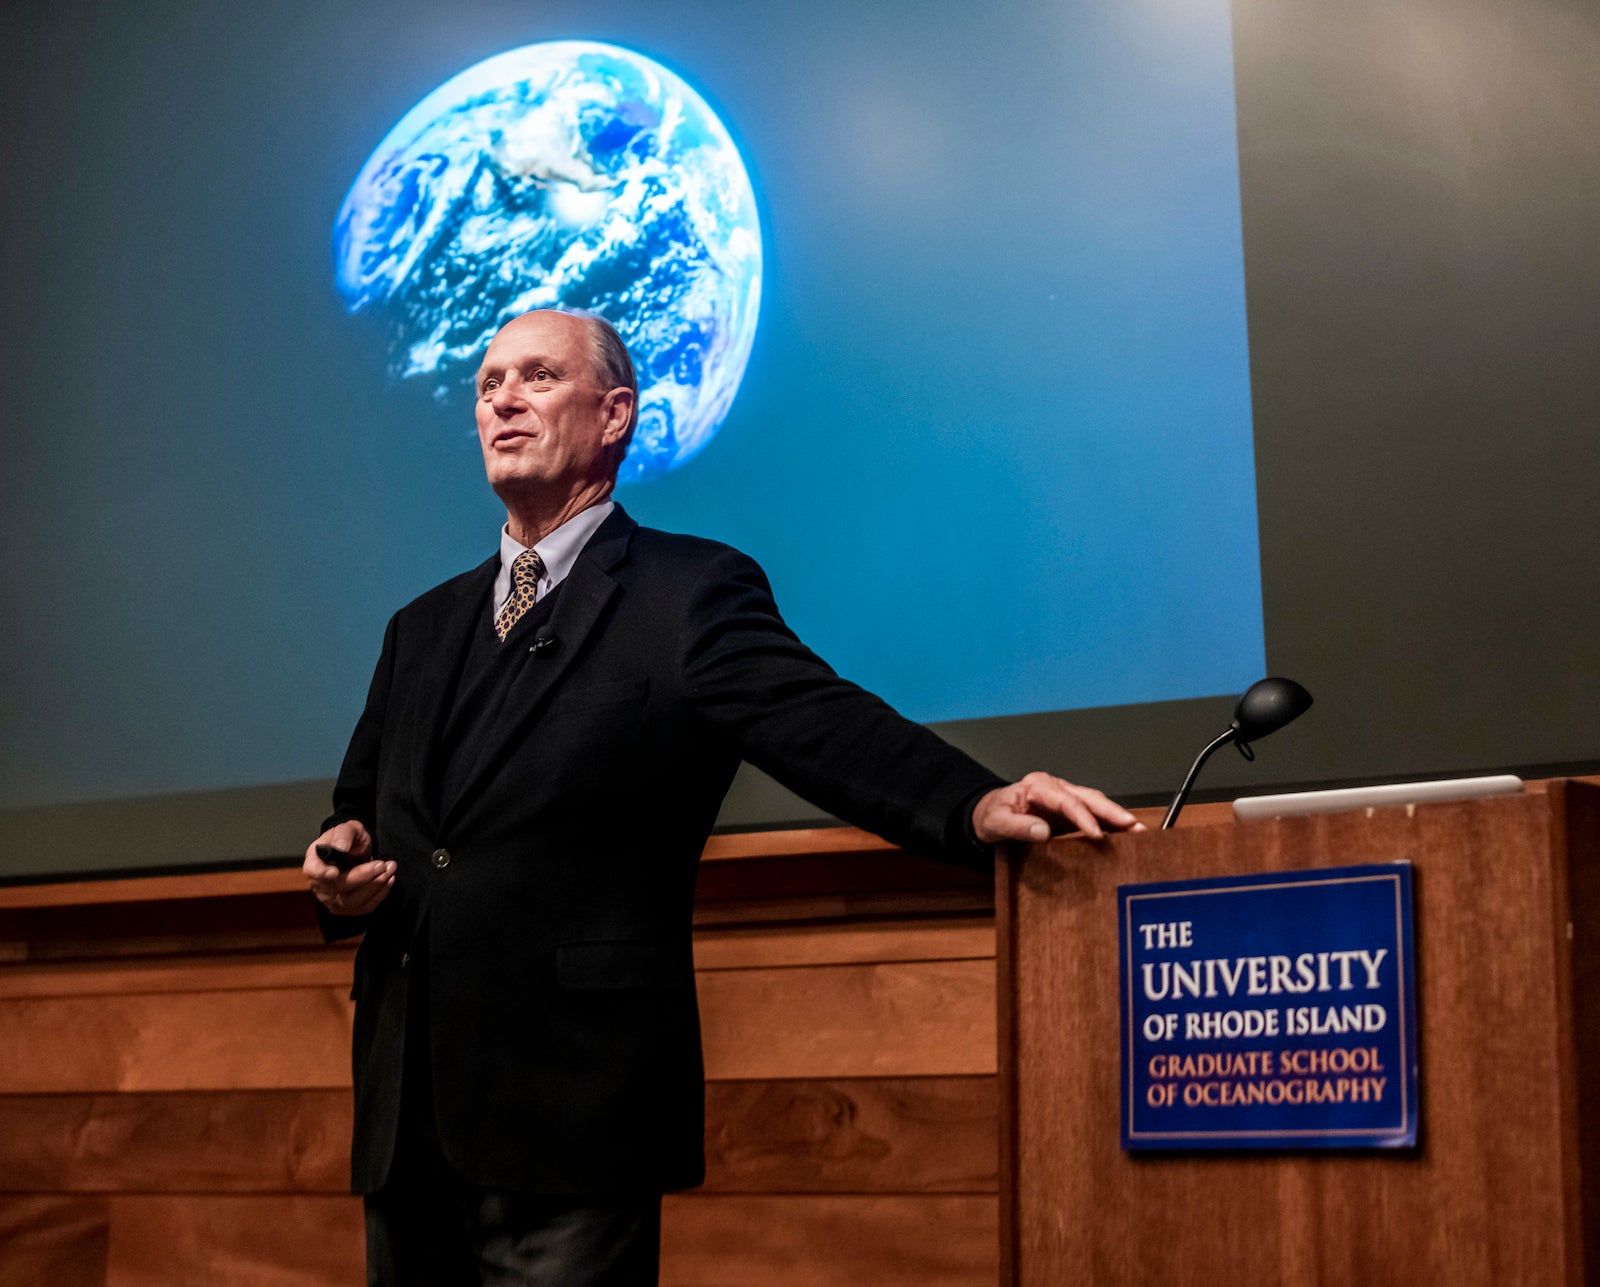 Robert Ballard standing next to a podium with an image of the Earth is projected on a screen behind him.